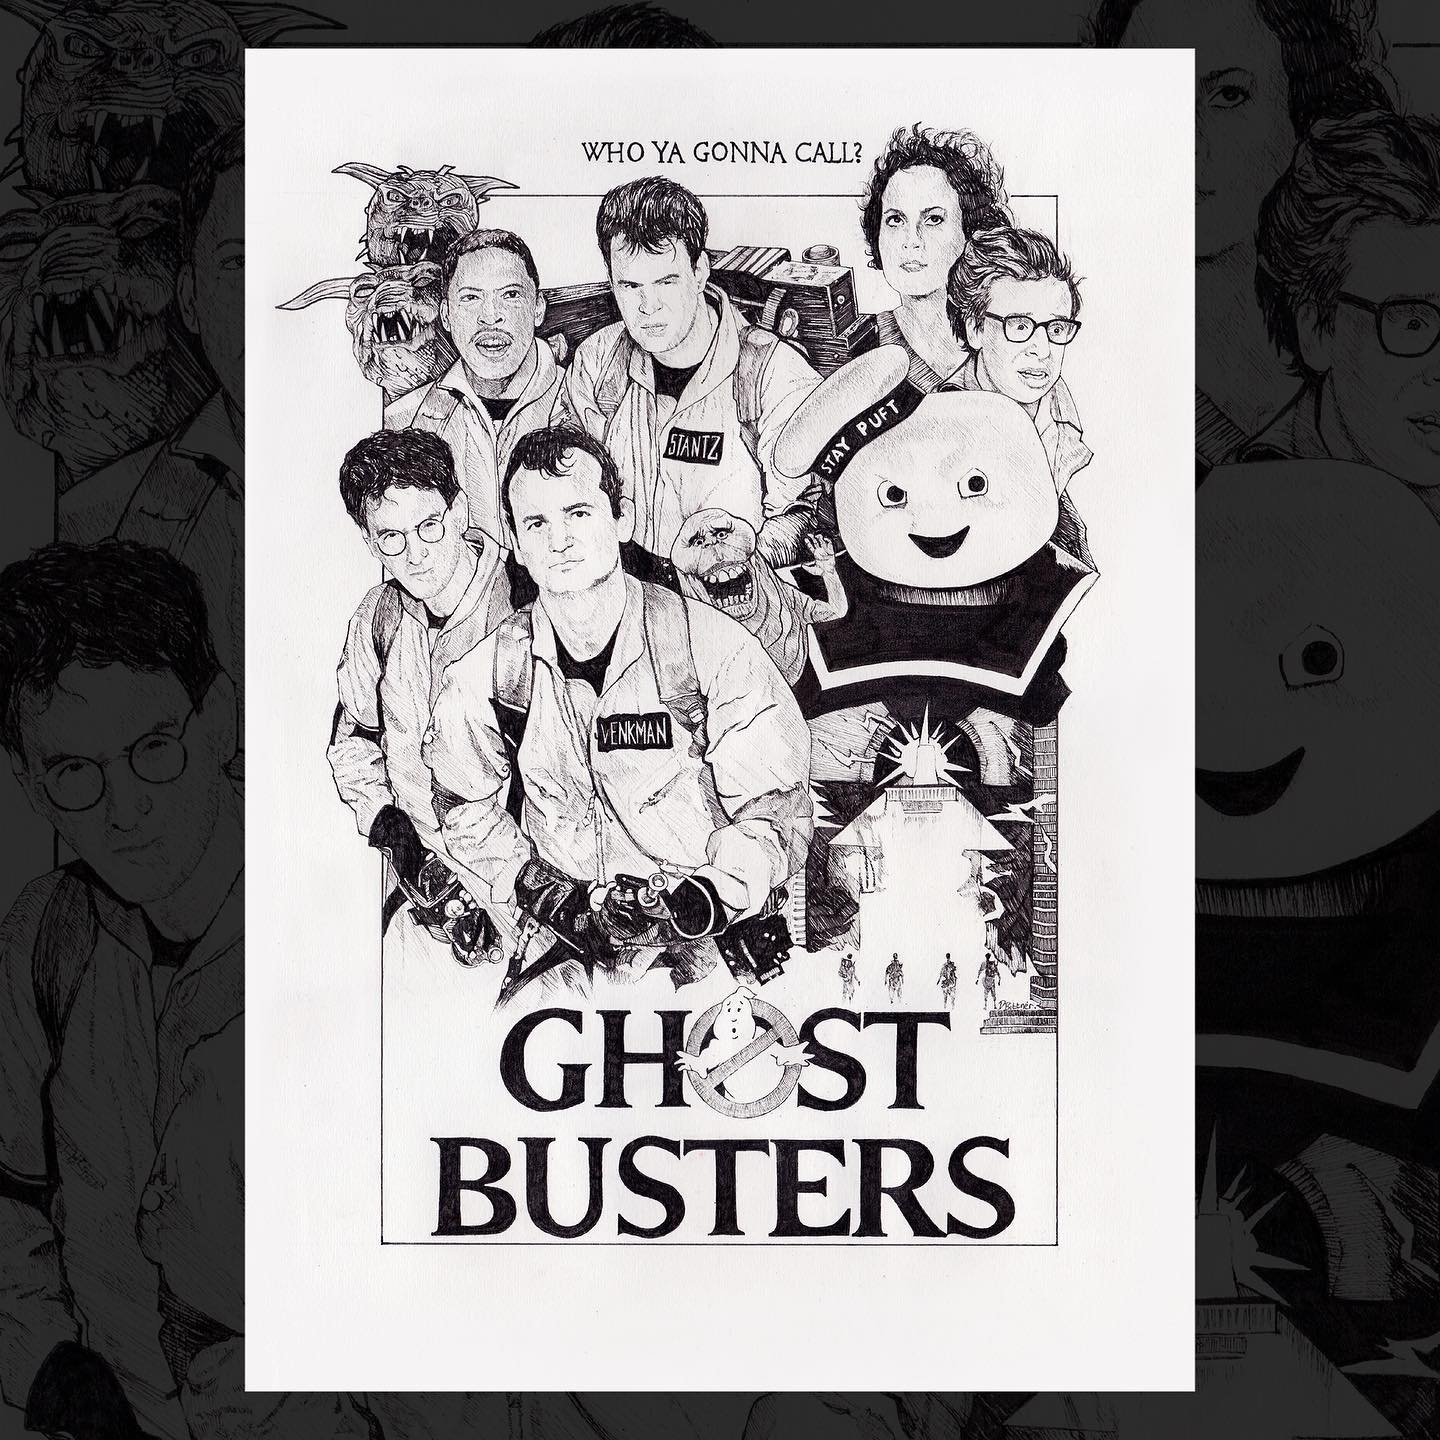 Here&rsquo;s a new Ghostbusters ink drawing I&rsquo;ve made; pen on paper. The original is currently available on my website (link in bio). Free worldwide shipping! 

#ghostbusters #ghostbusters1984 #ghostbustersday #alternativemovieposter #moviepost